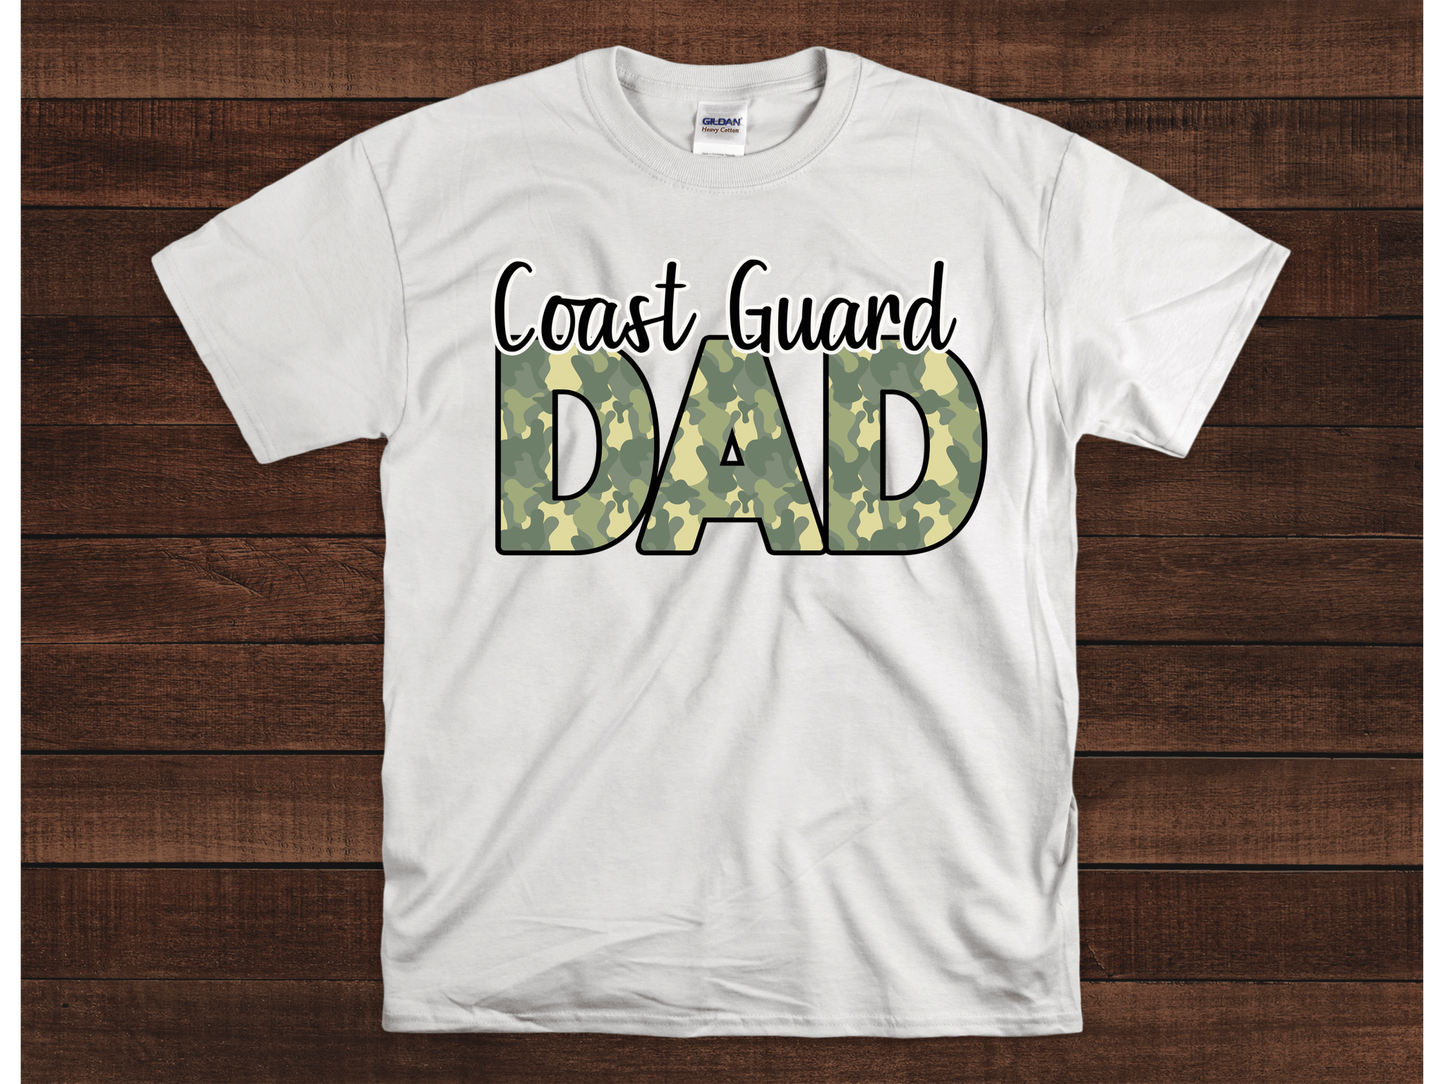 Military Dad T-shirts